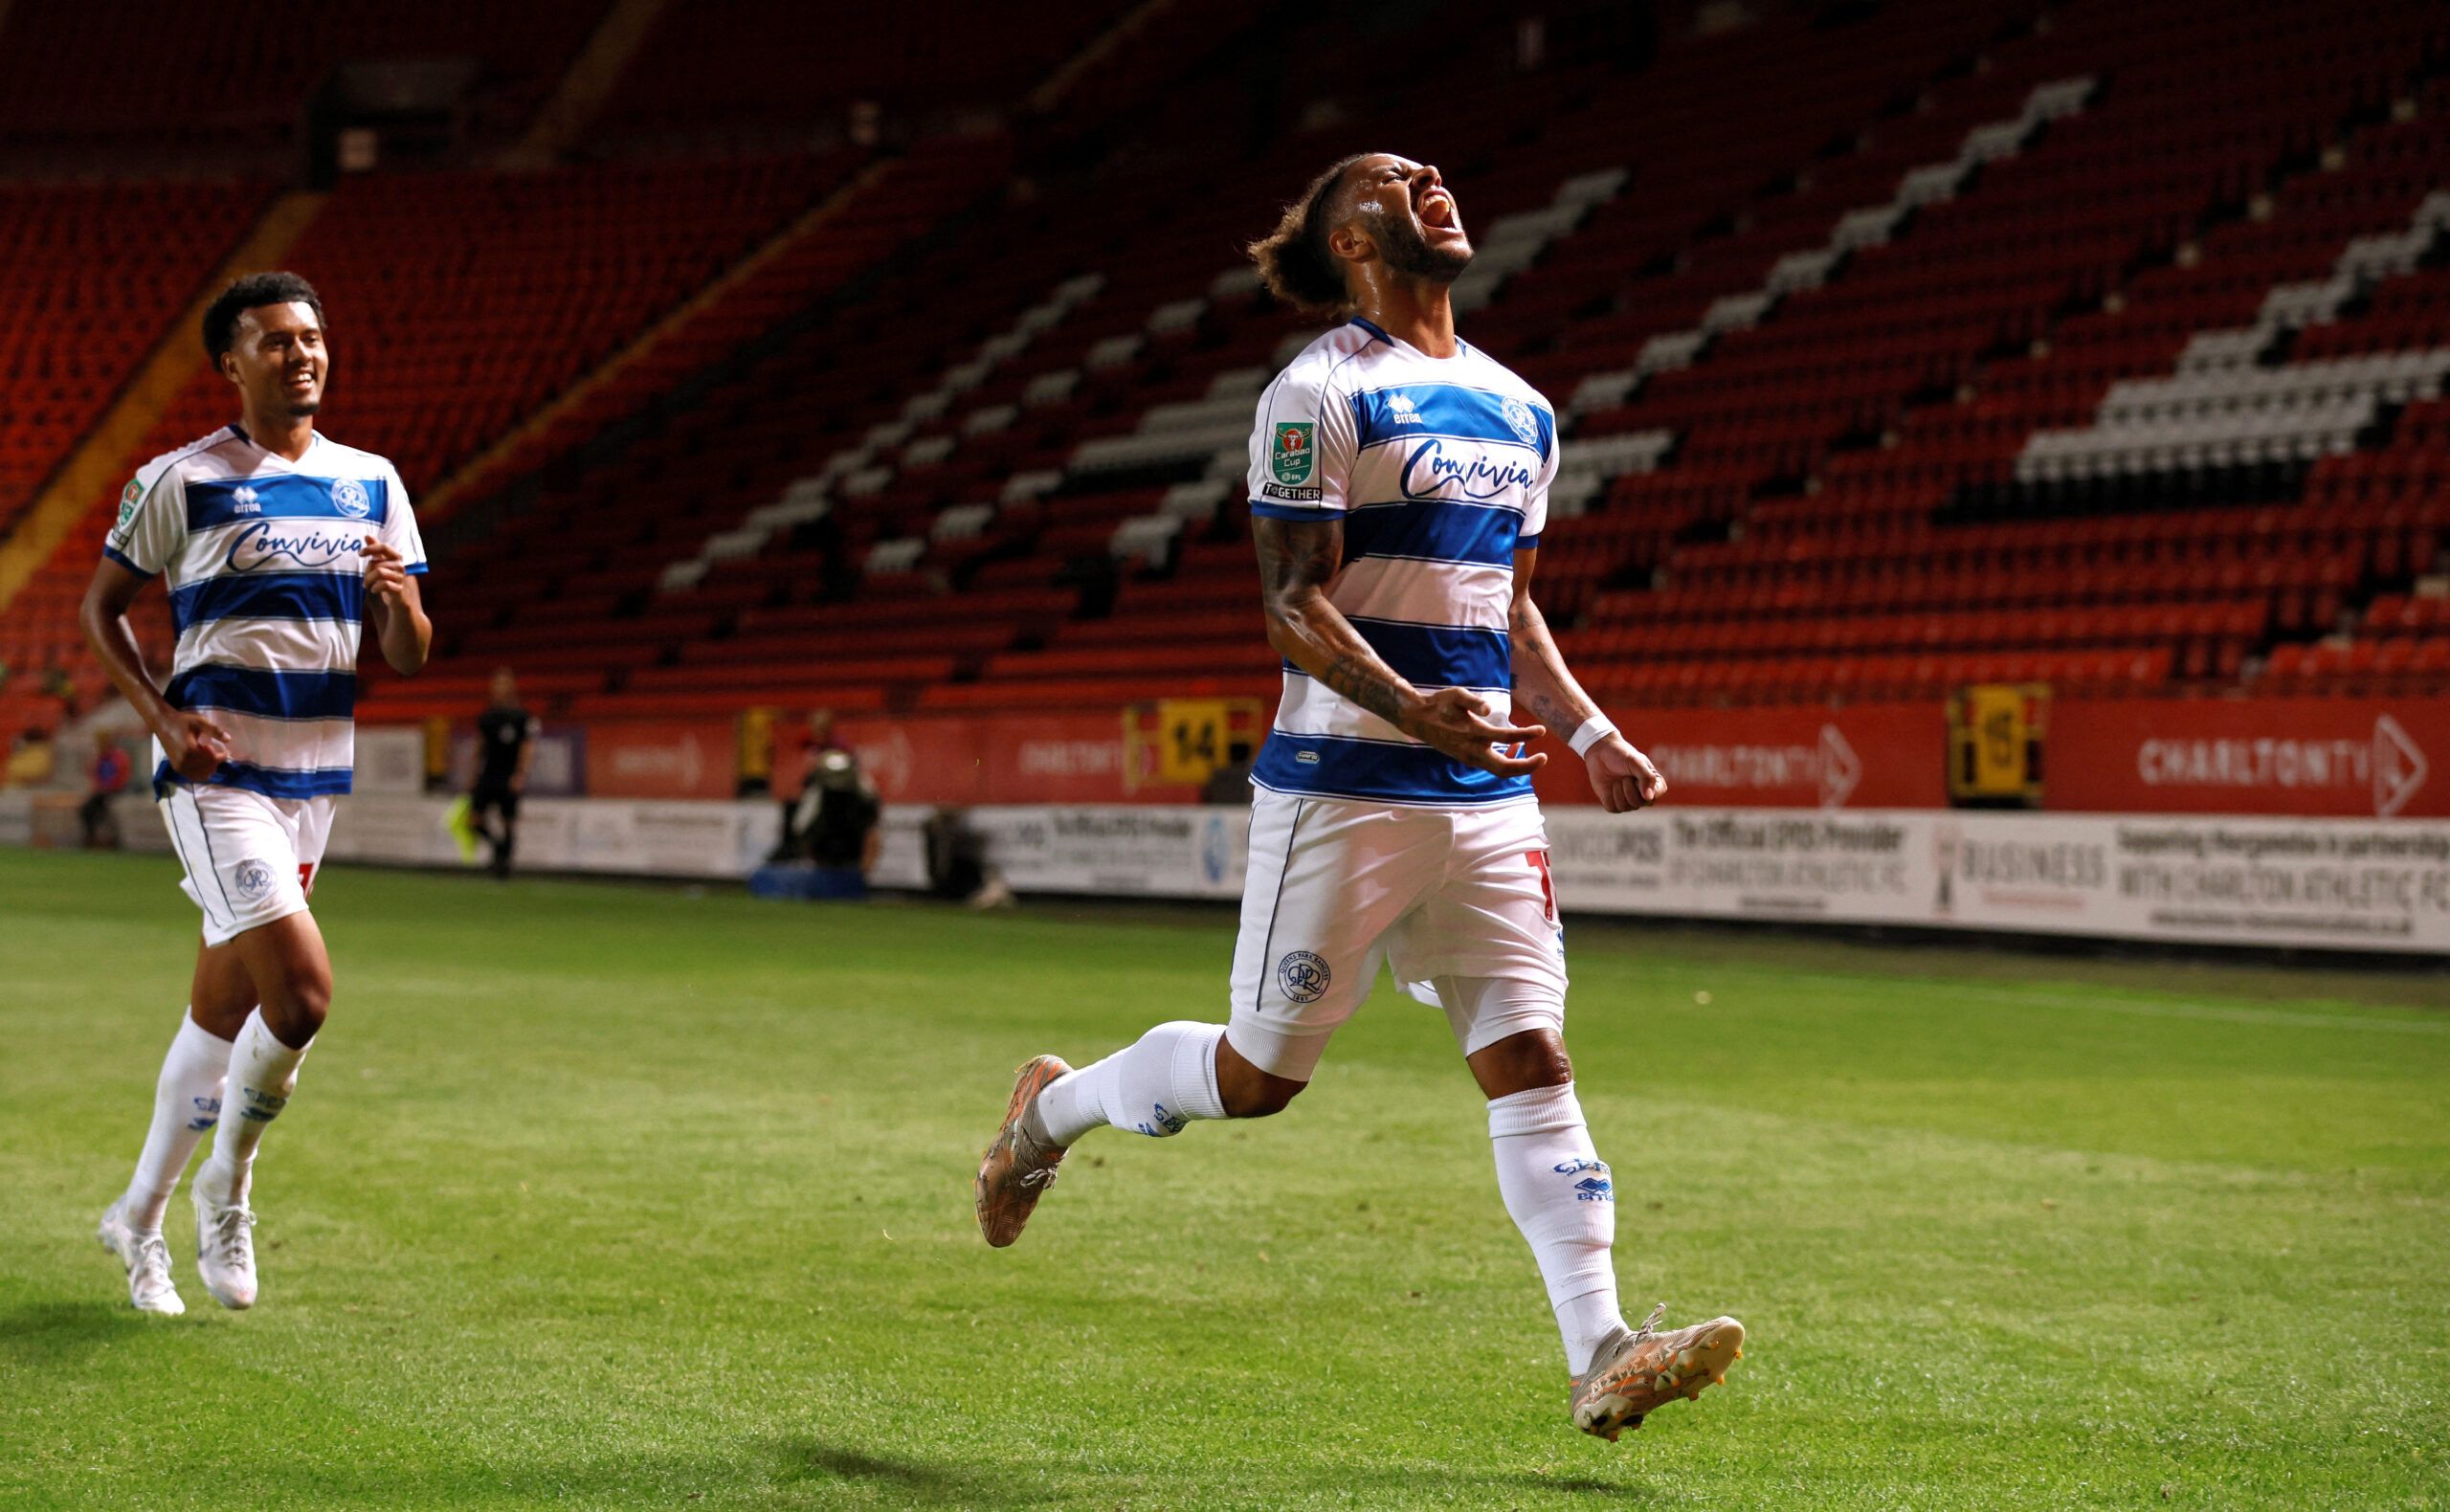 Soccer Football - Carabao Cup - Charlton Athletic v Queens Park Rangers - The Valley, London, Britain - August 9, 2022  Queens Park Rangers' Tyler Roberts celebrates scoring their first goal  Action Images/Andrew Couldridge  EDITORIAL USE ONLY. No use with unauthorized audio, video, data, fixture lists, club/league logos or 